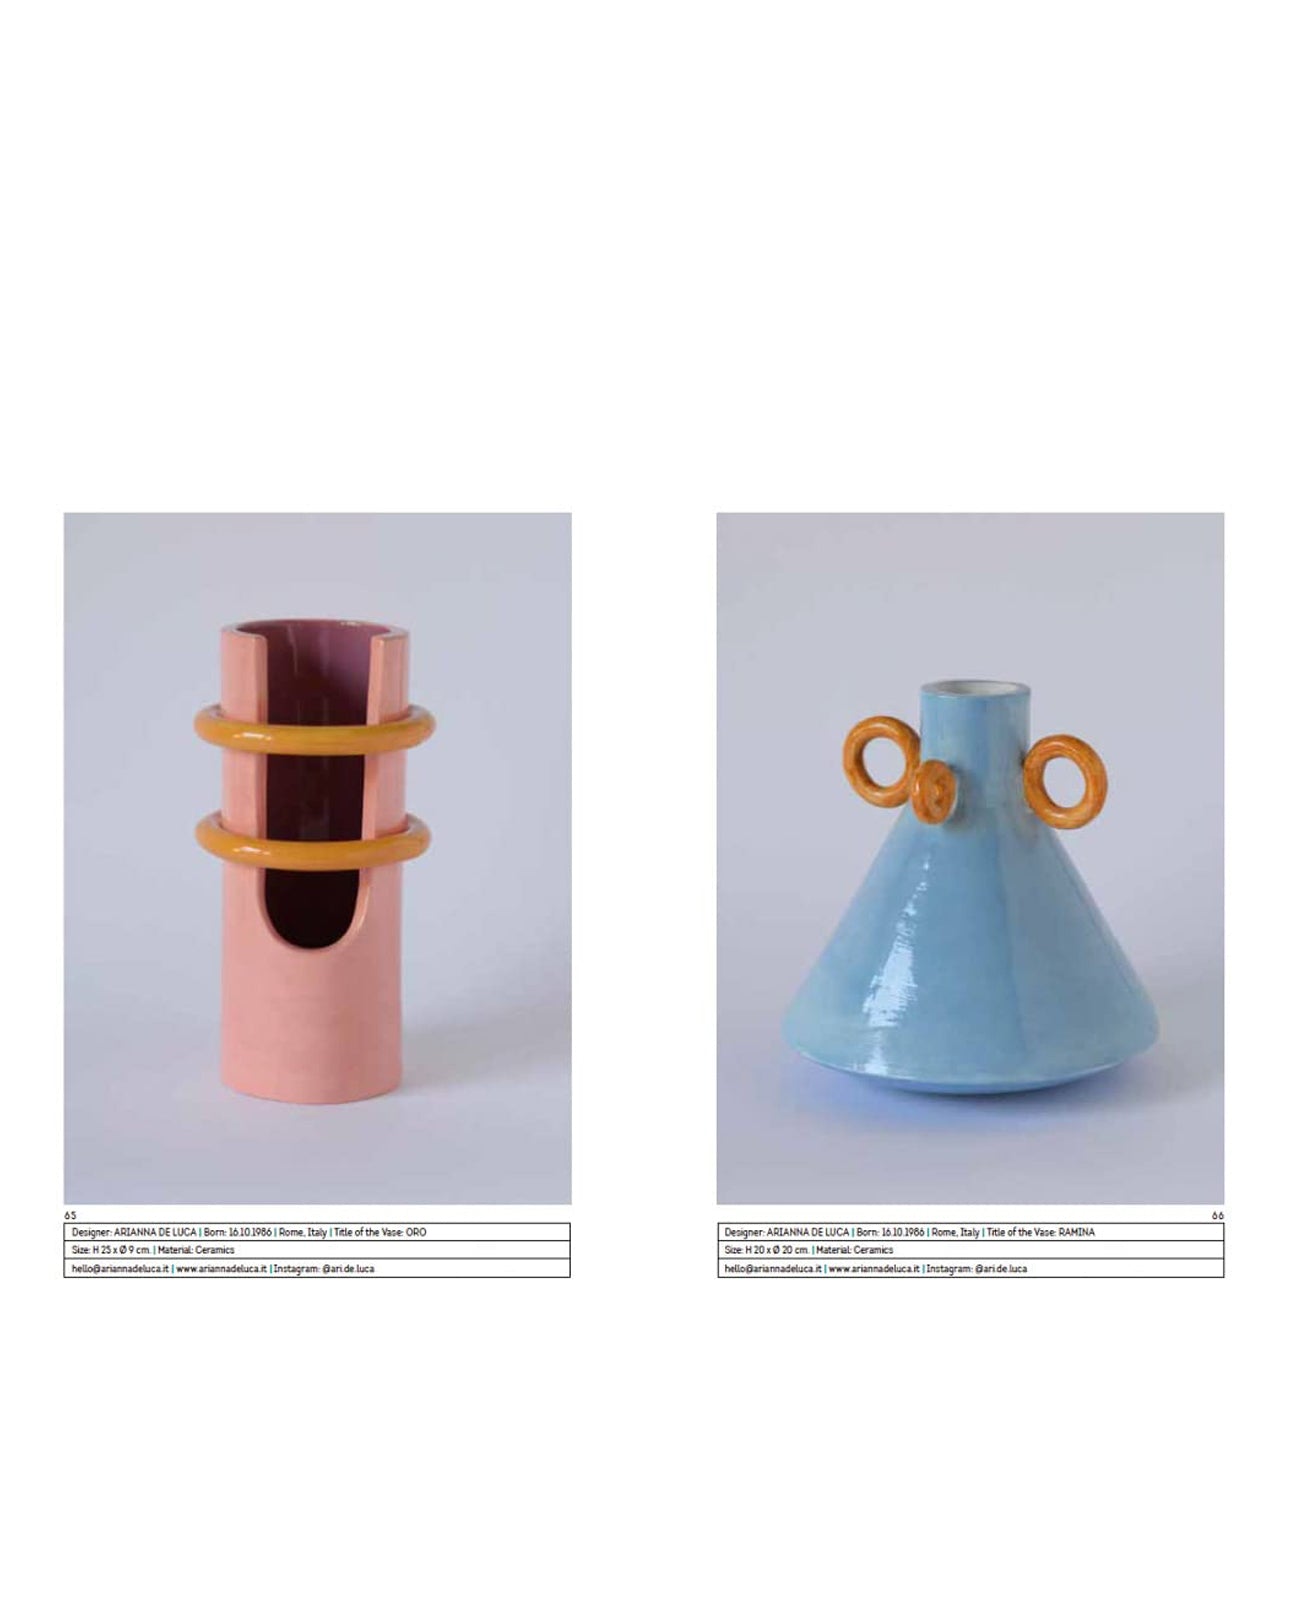 1000 Vases, Volume 1 by Meet My Project and Pier Paolo Pitacco available at Lahn.shop